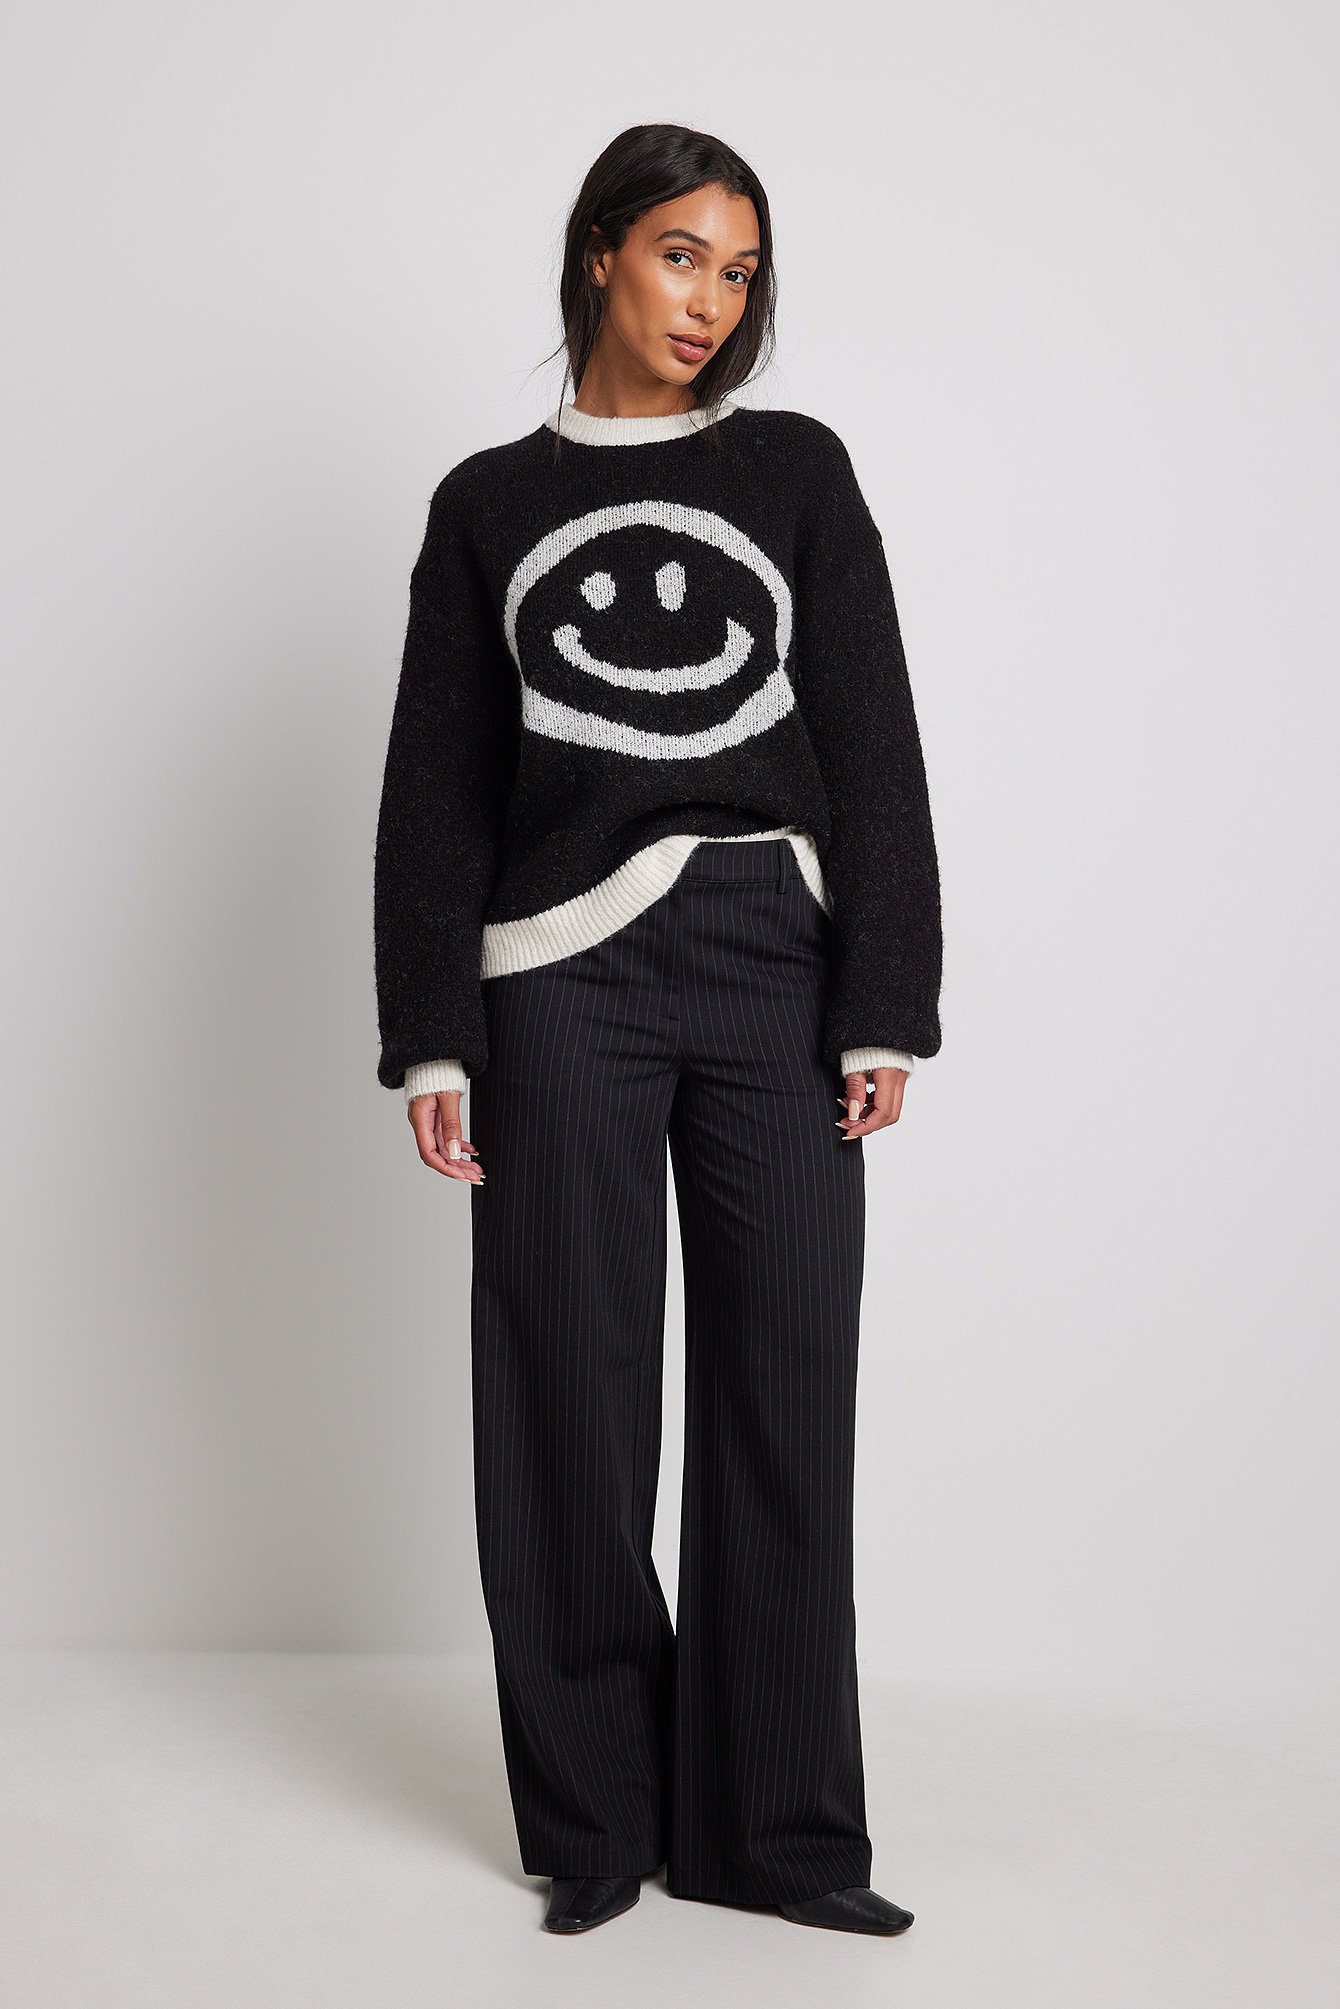 Smiley Pattern Sweater Outfit